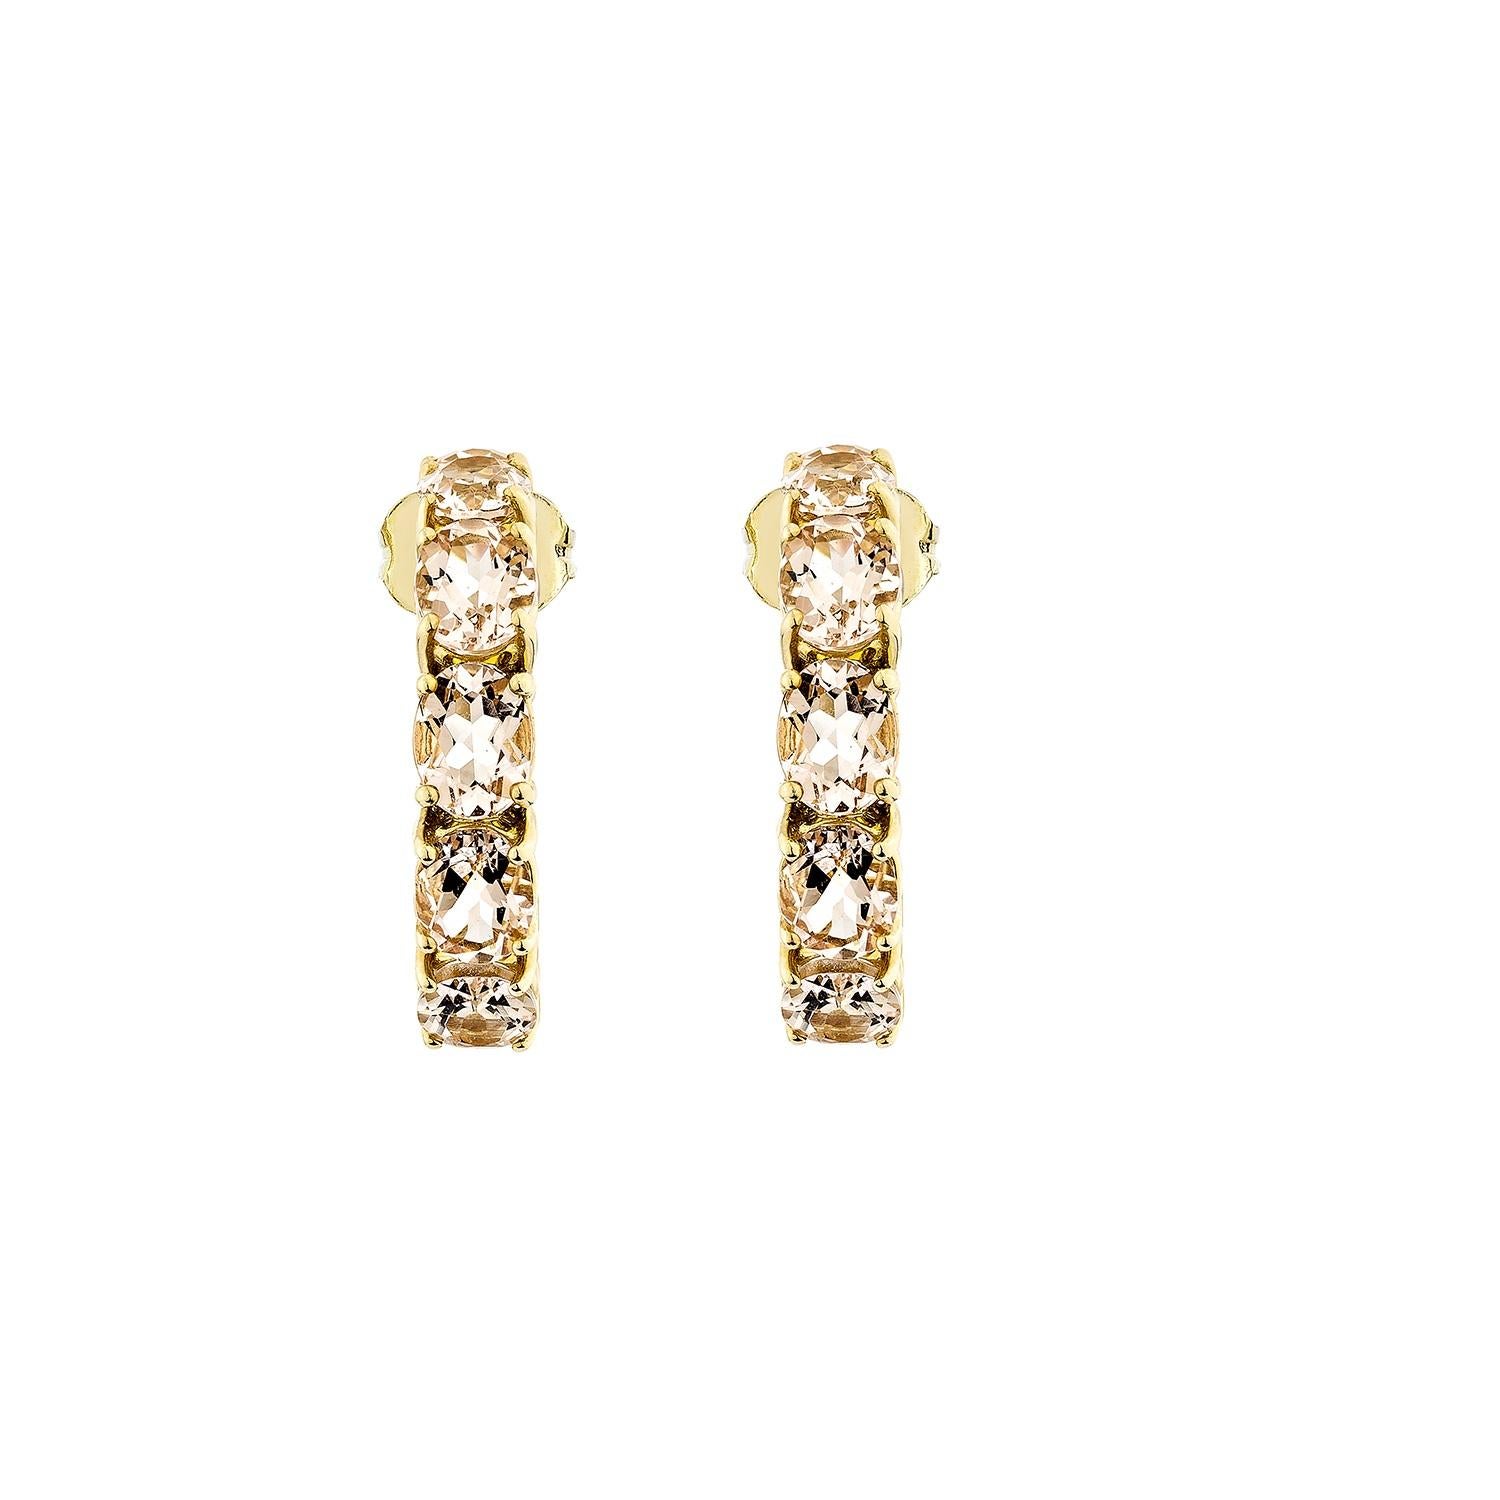 Contemporary 4.88 Carat Morganite Hoops Earring in 14Karat Yellow Gold. For Sale